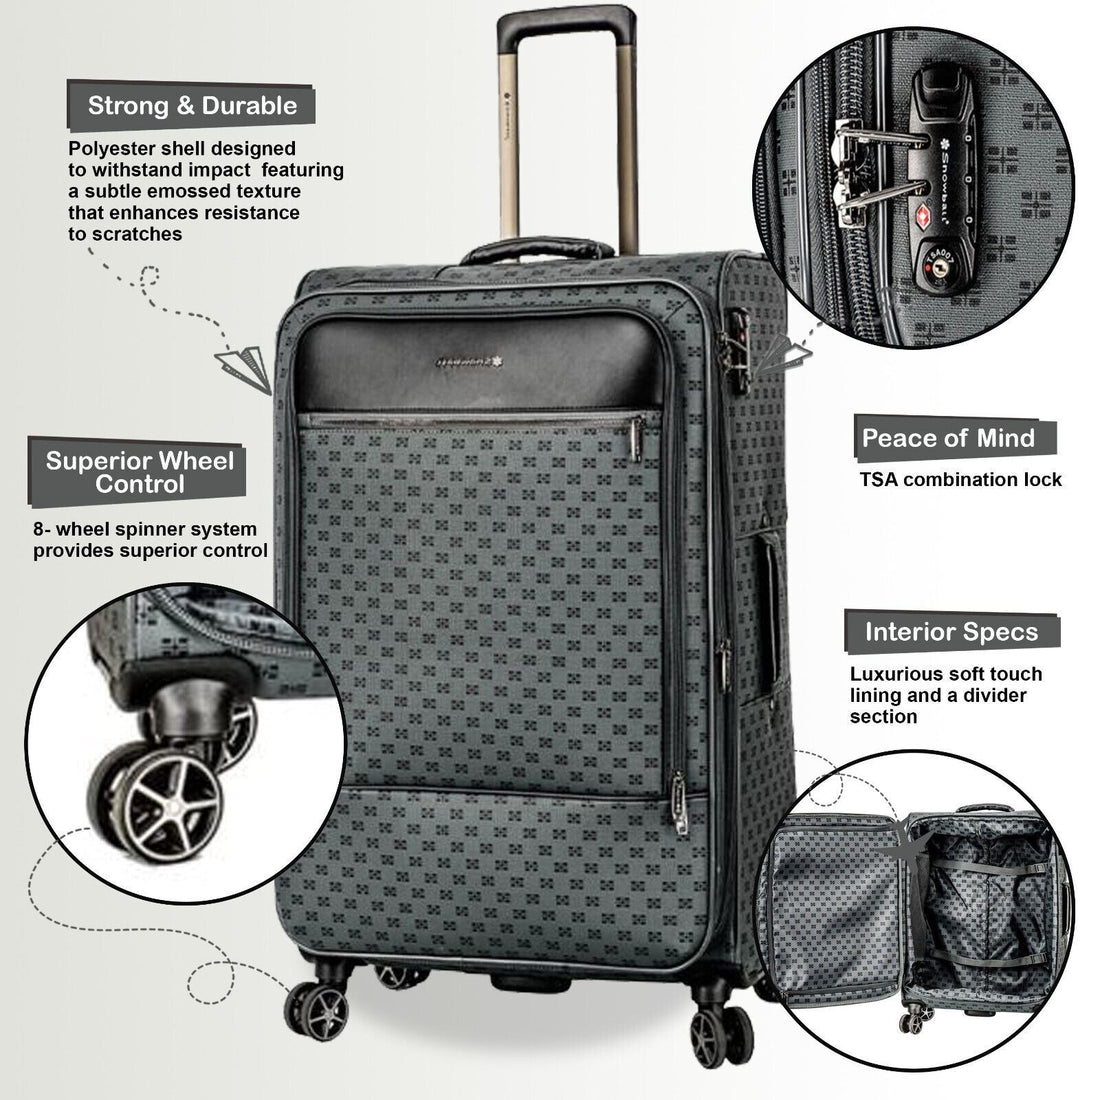 Cleveland Cabin Soft Shell Suitcase in Grey